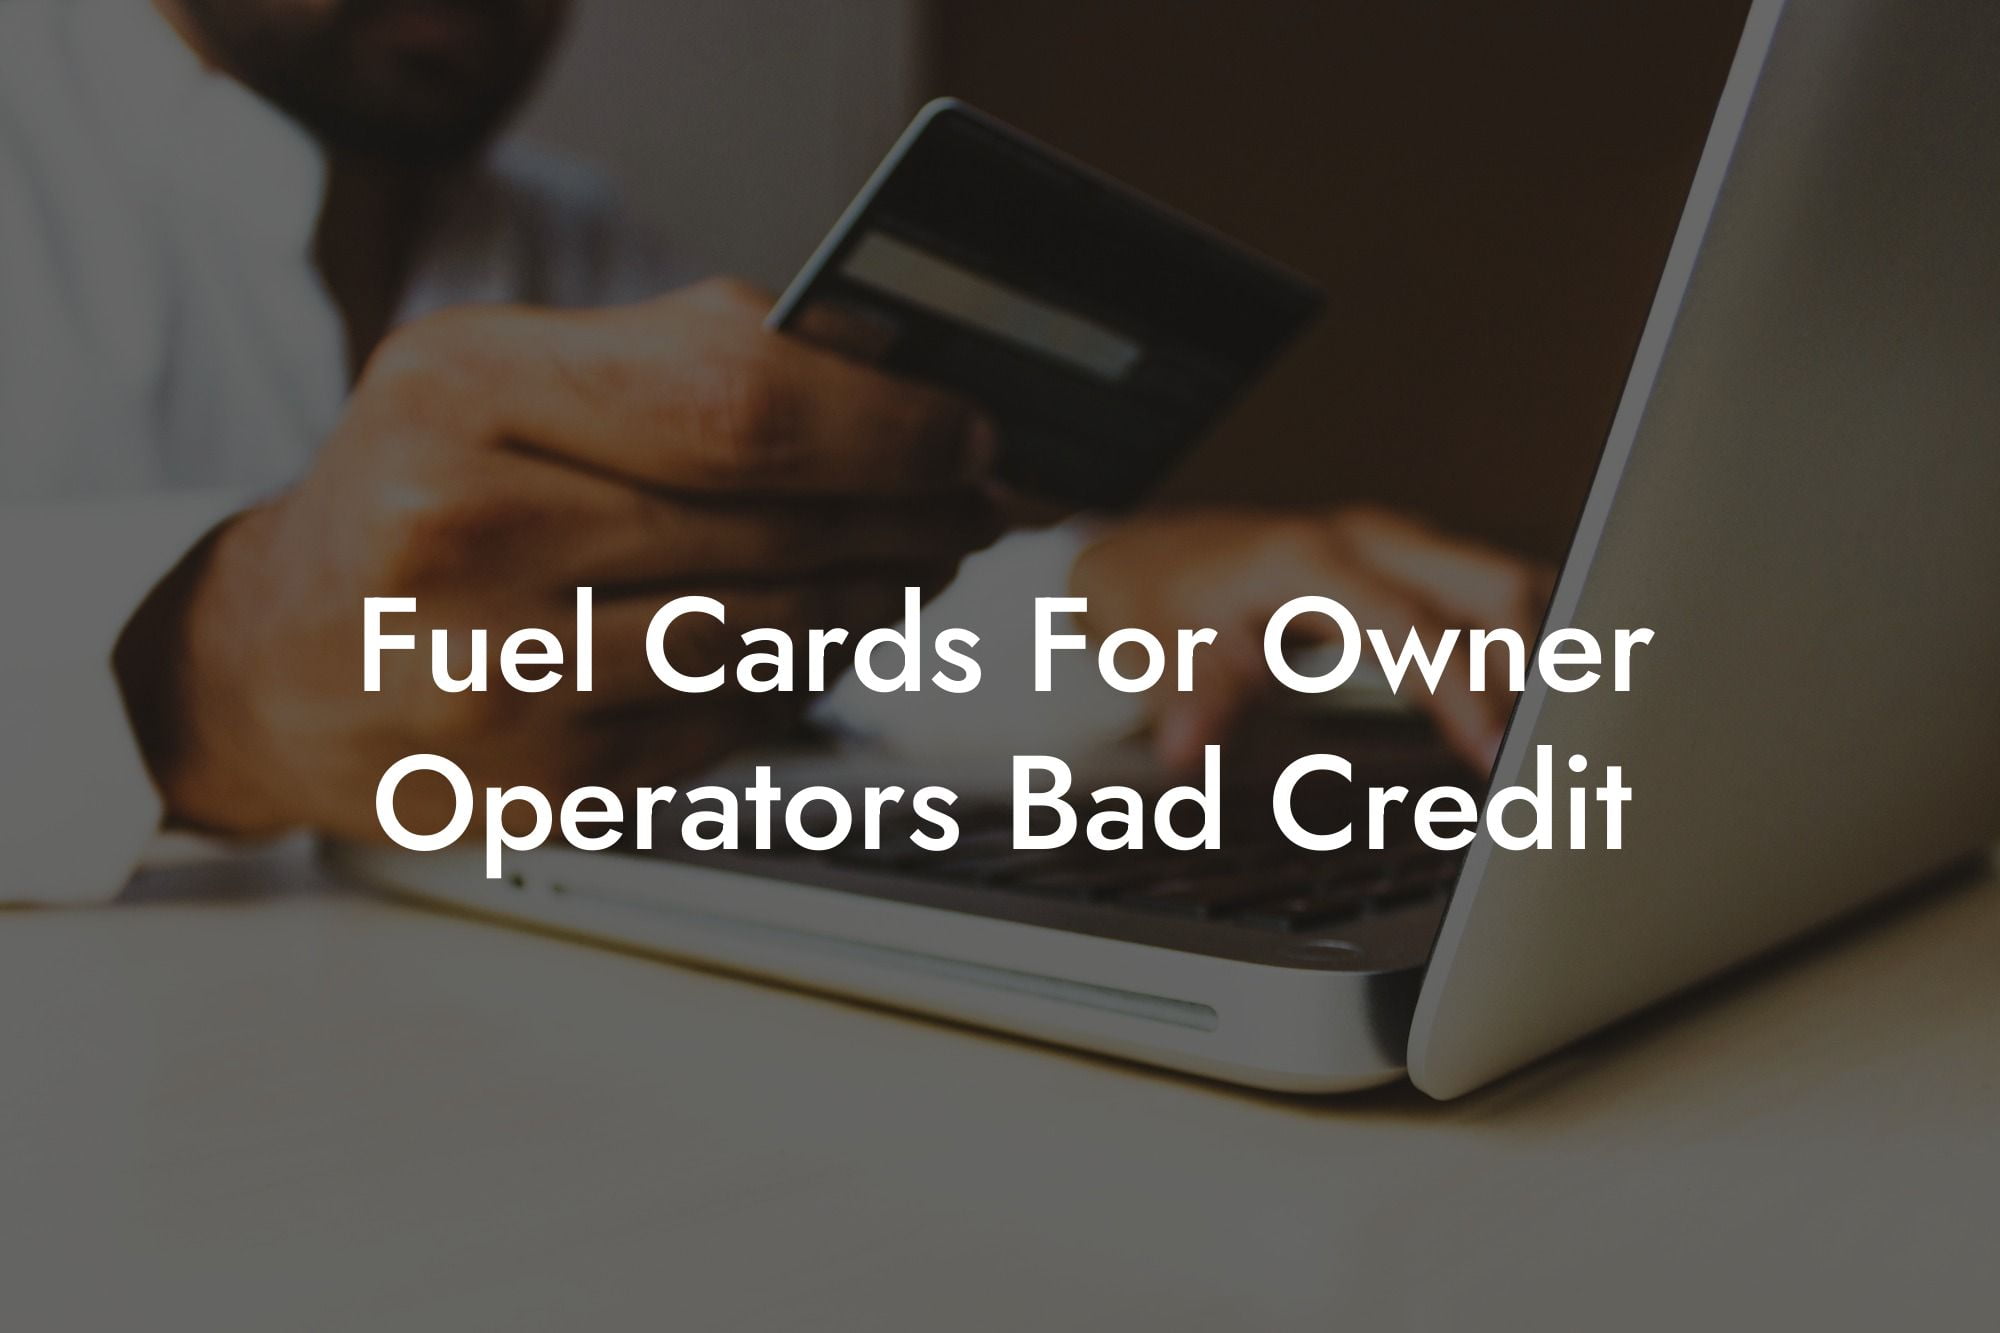 Fuel Cards For Owner Operators Bad Credit